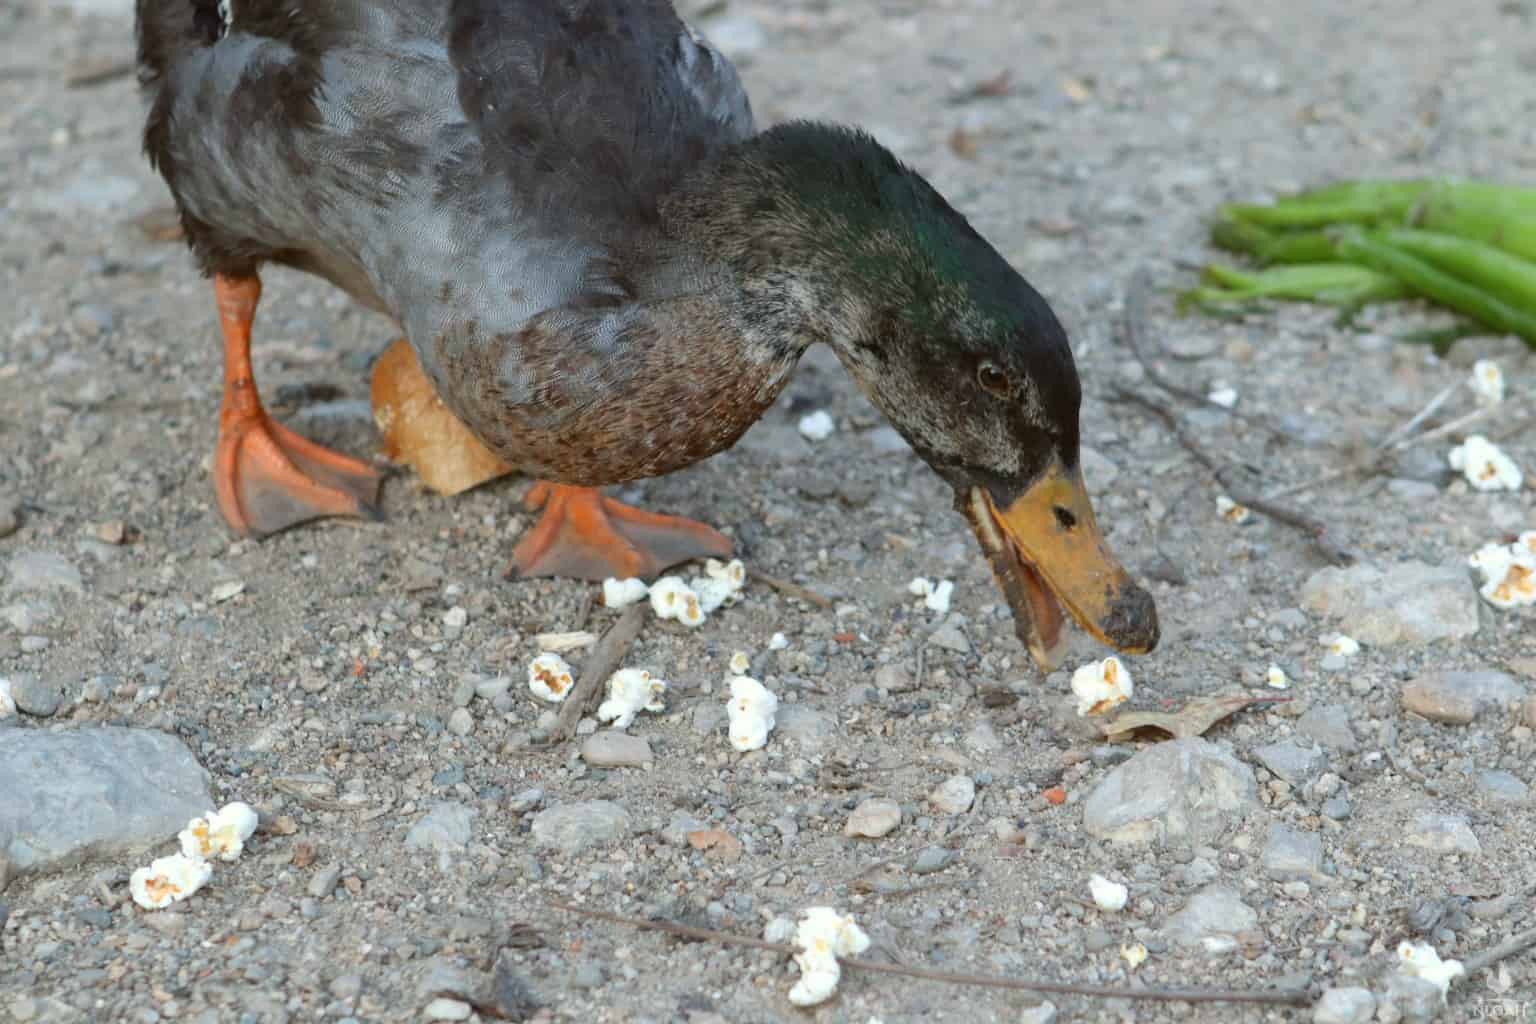 a duck eating popcorn